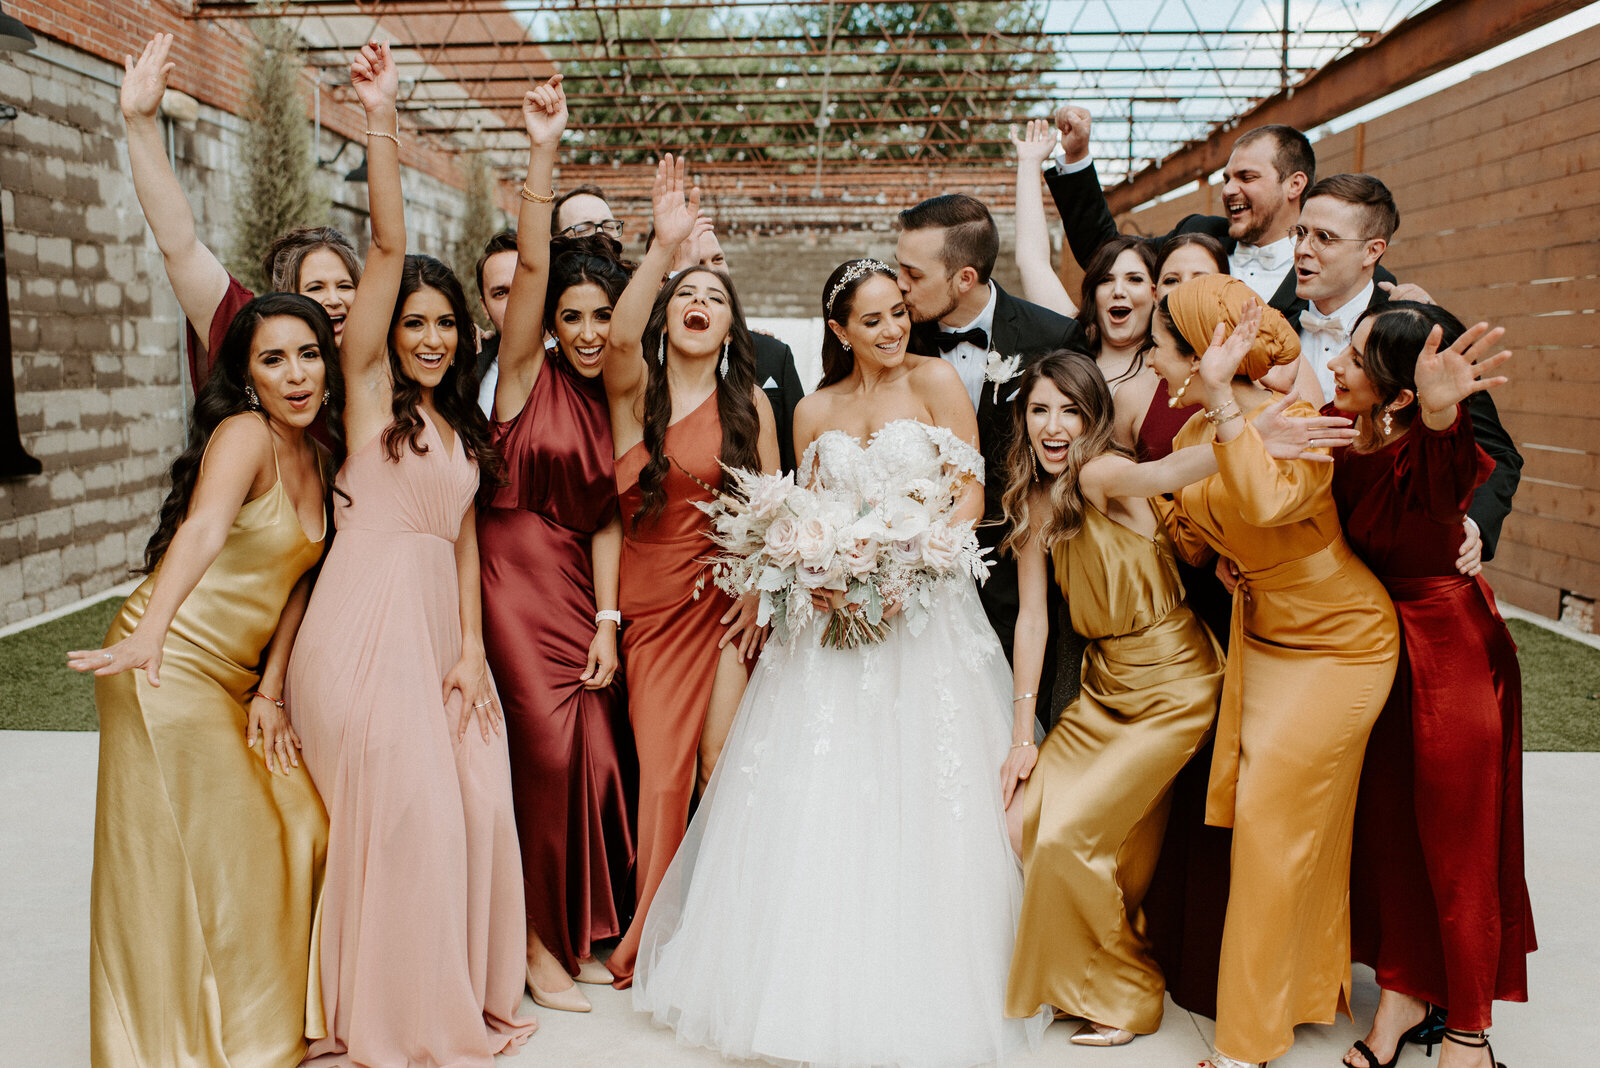 A group of bridesmaids and groomsmen celebrates around a bride and groom as he kisses her cheek at The Hudson event venue in Wichita, Kansas. The bride holds a beautiful bouquet,  the women are wearing different colors of dresses, and the men are waring tuxedos.